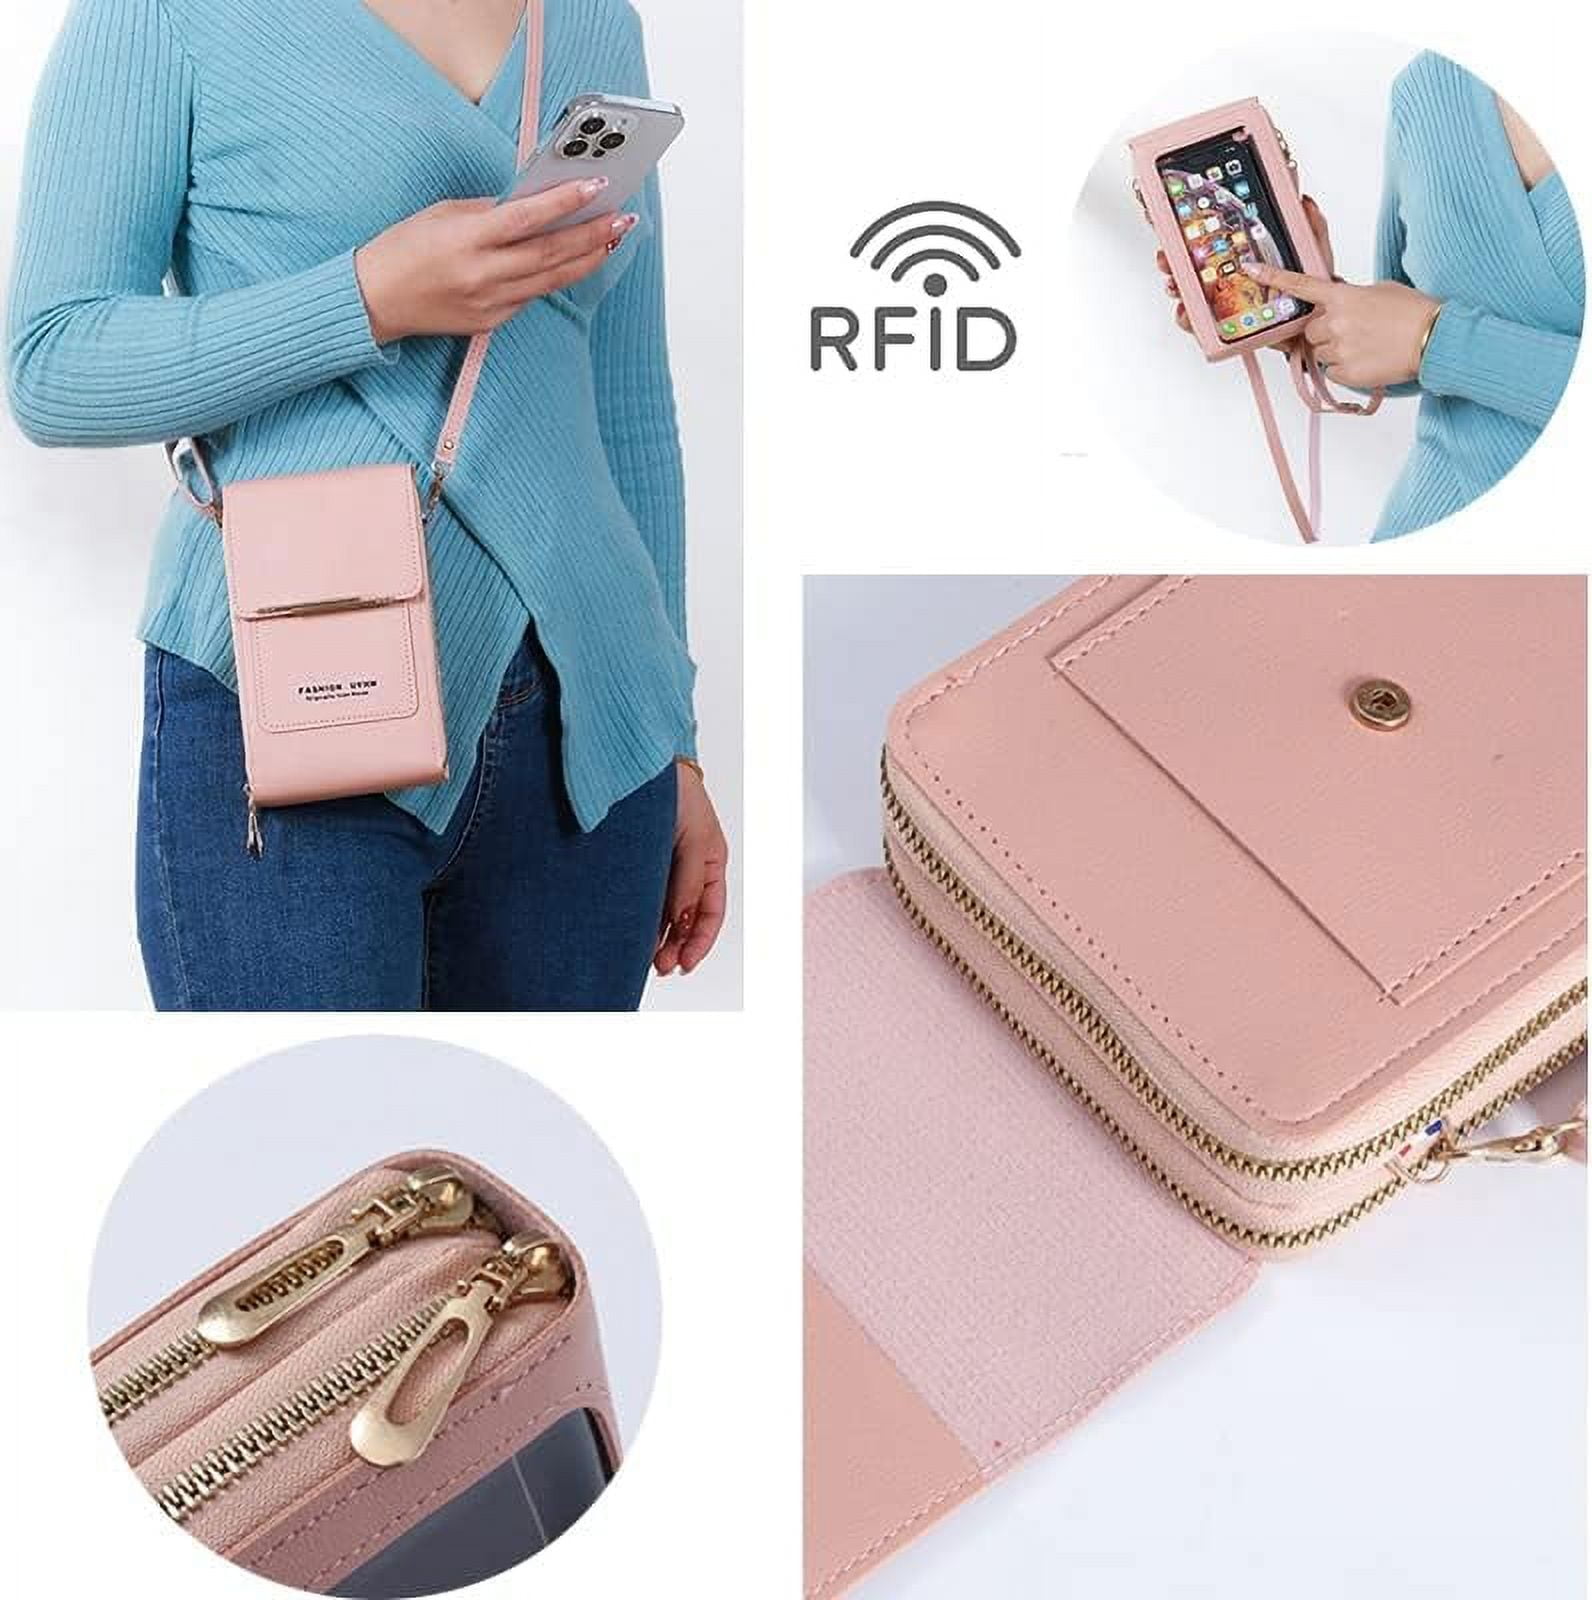 Anti-Theft Leather Bag,Small Crossbody Cell Phone Purse Wallet for  Women,RFID Block Phone Purse Crossbody with Shoulder Strap - Walmart.com